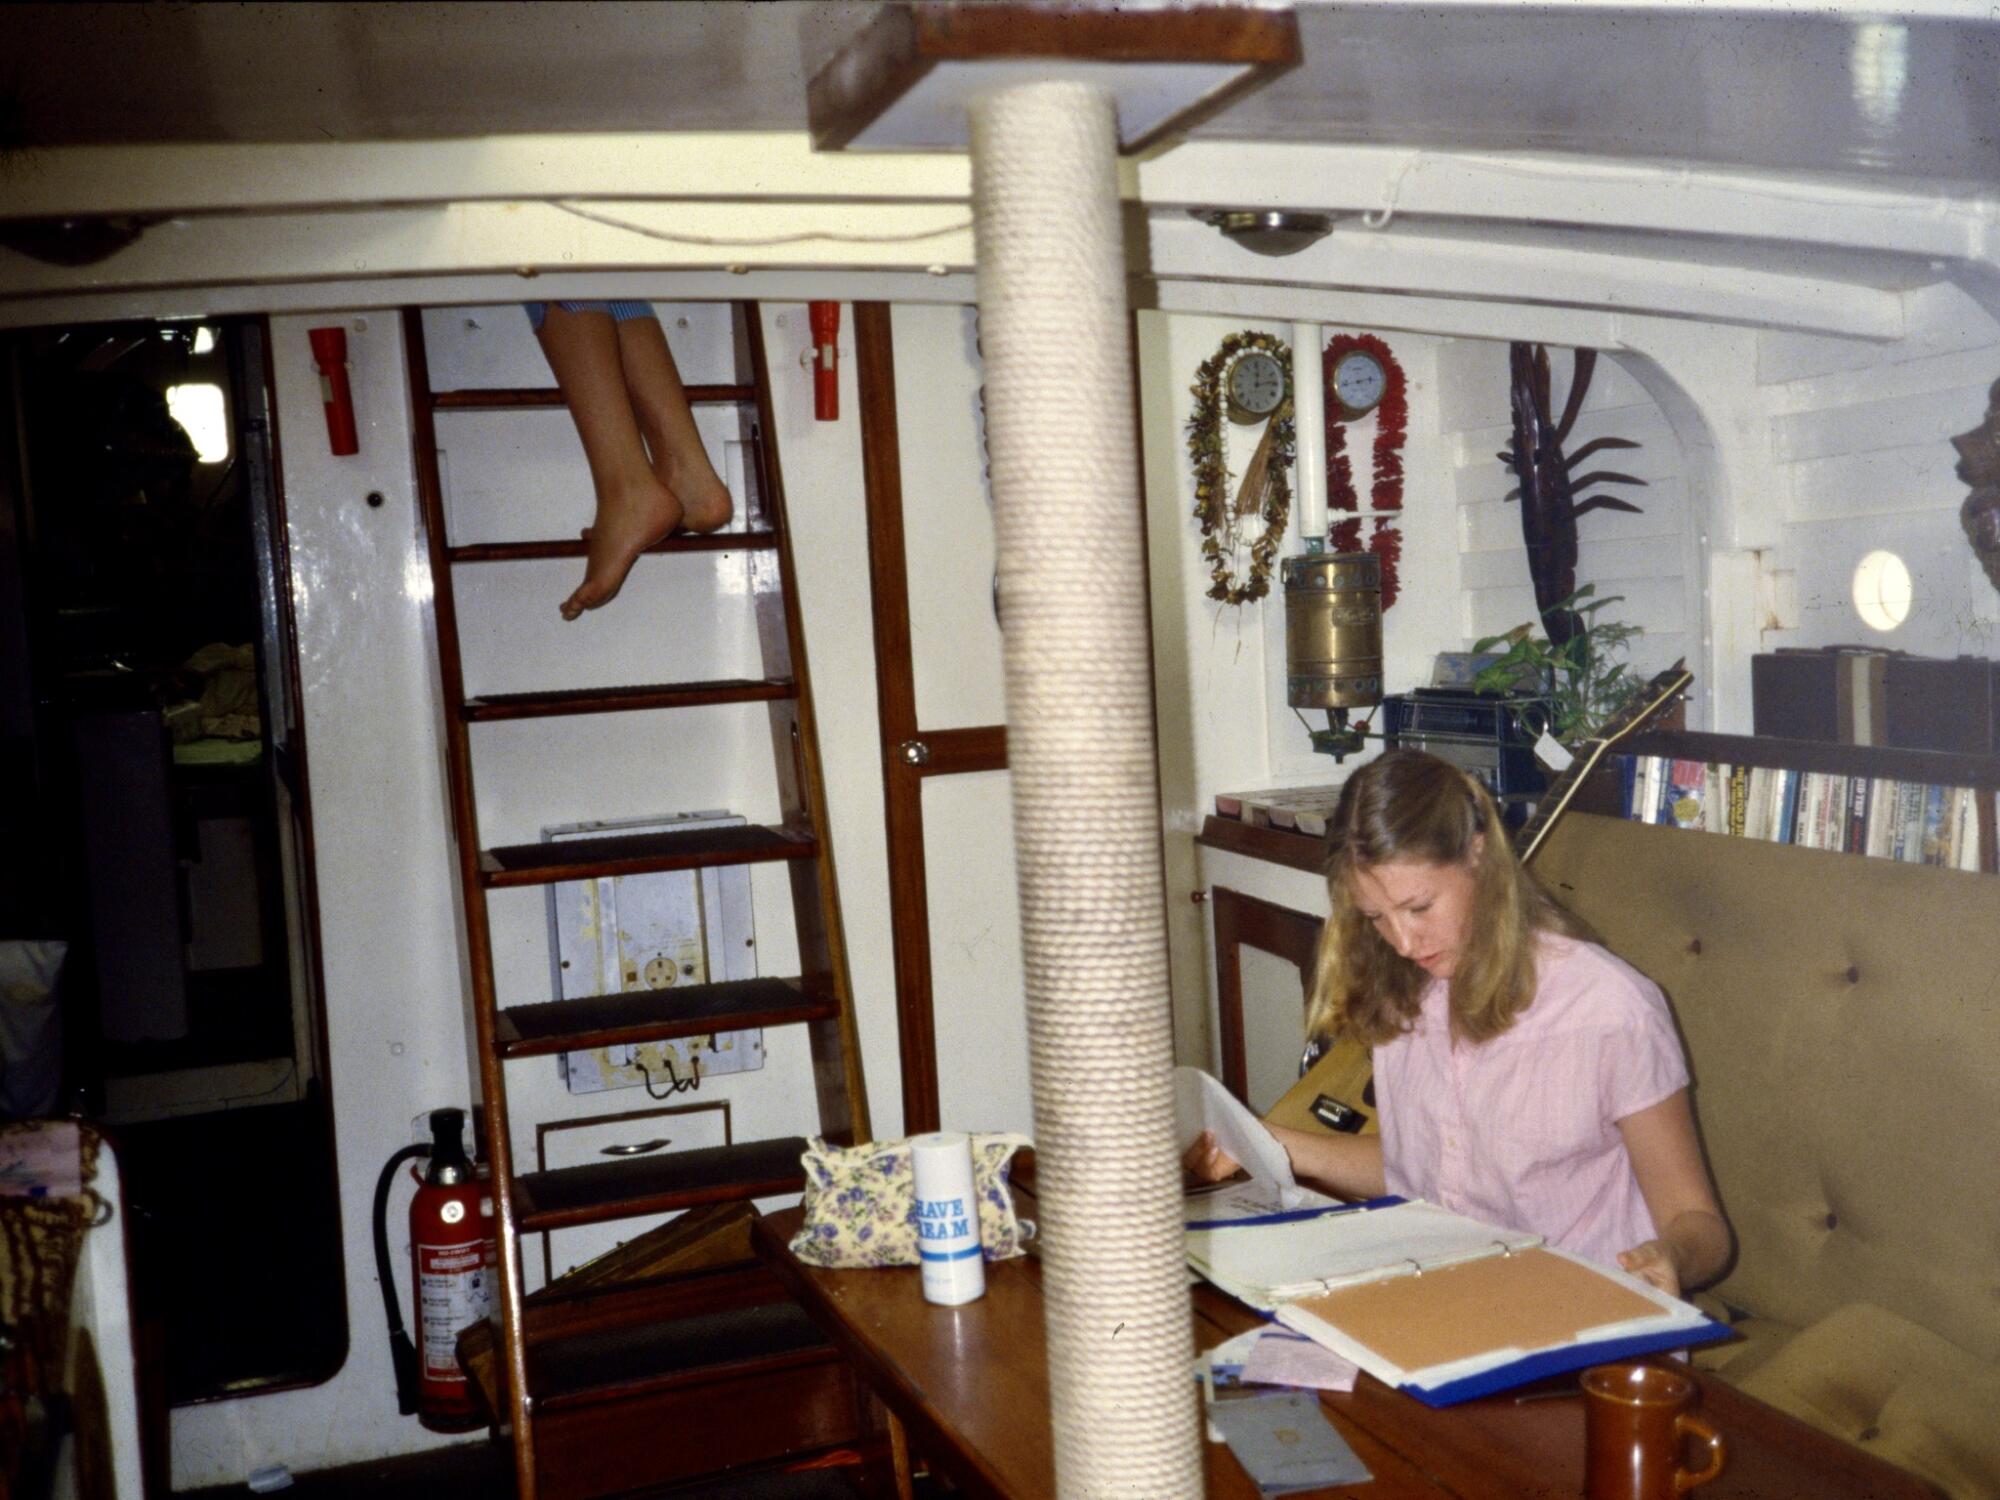 Heywood, probably 16, circa 1985, studying below deck. She eventually caught up on her education and graduated from Oxford.